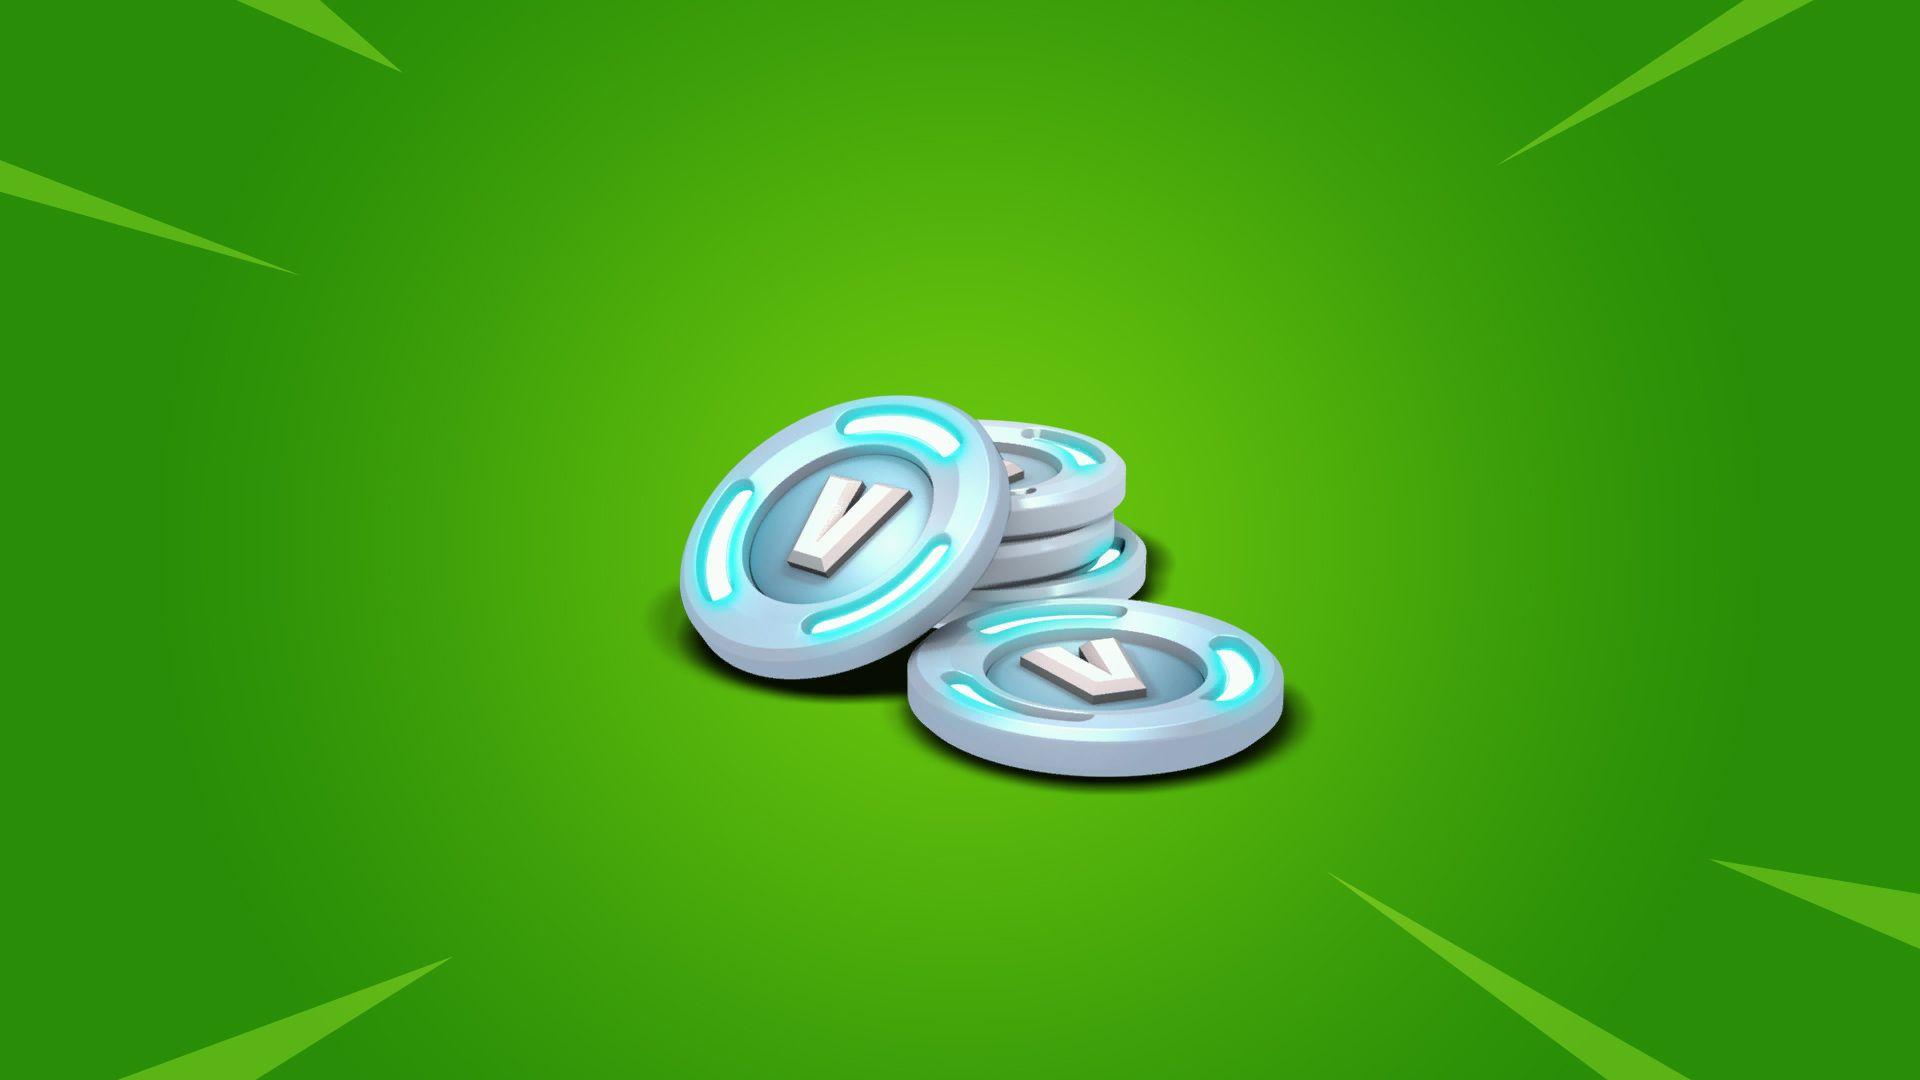 Gold Xbox Logo - Promotion: 000 V Bucks + 3 Months Of Xbox Live Gold For $9.99